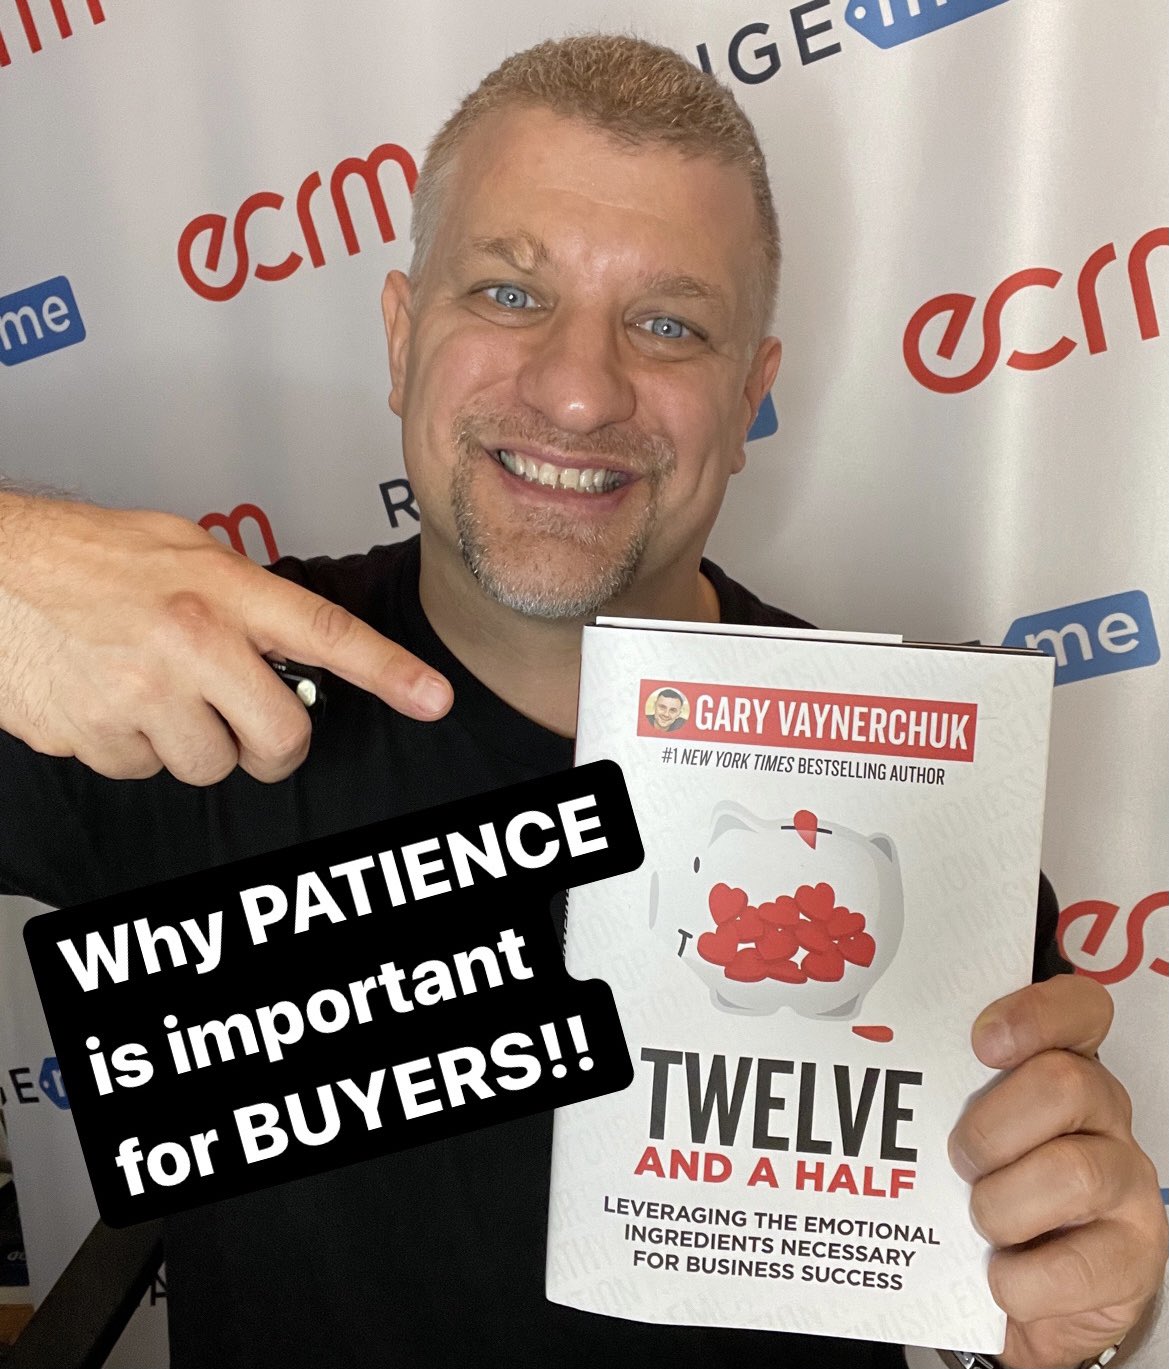 ECRM - How Click & Carry Landed Six Retail Deals at One ECRM Program